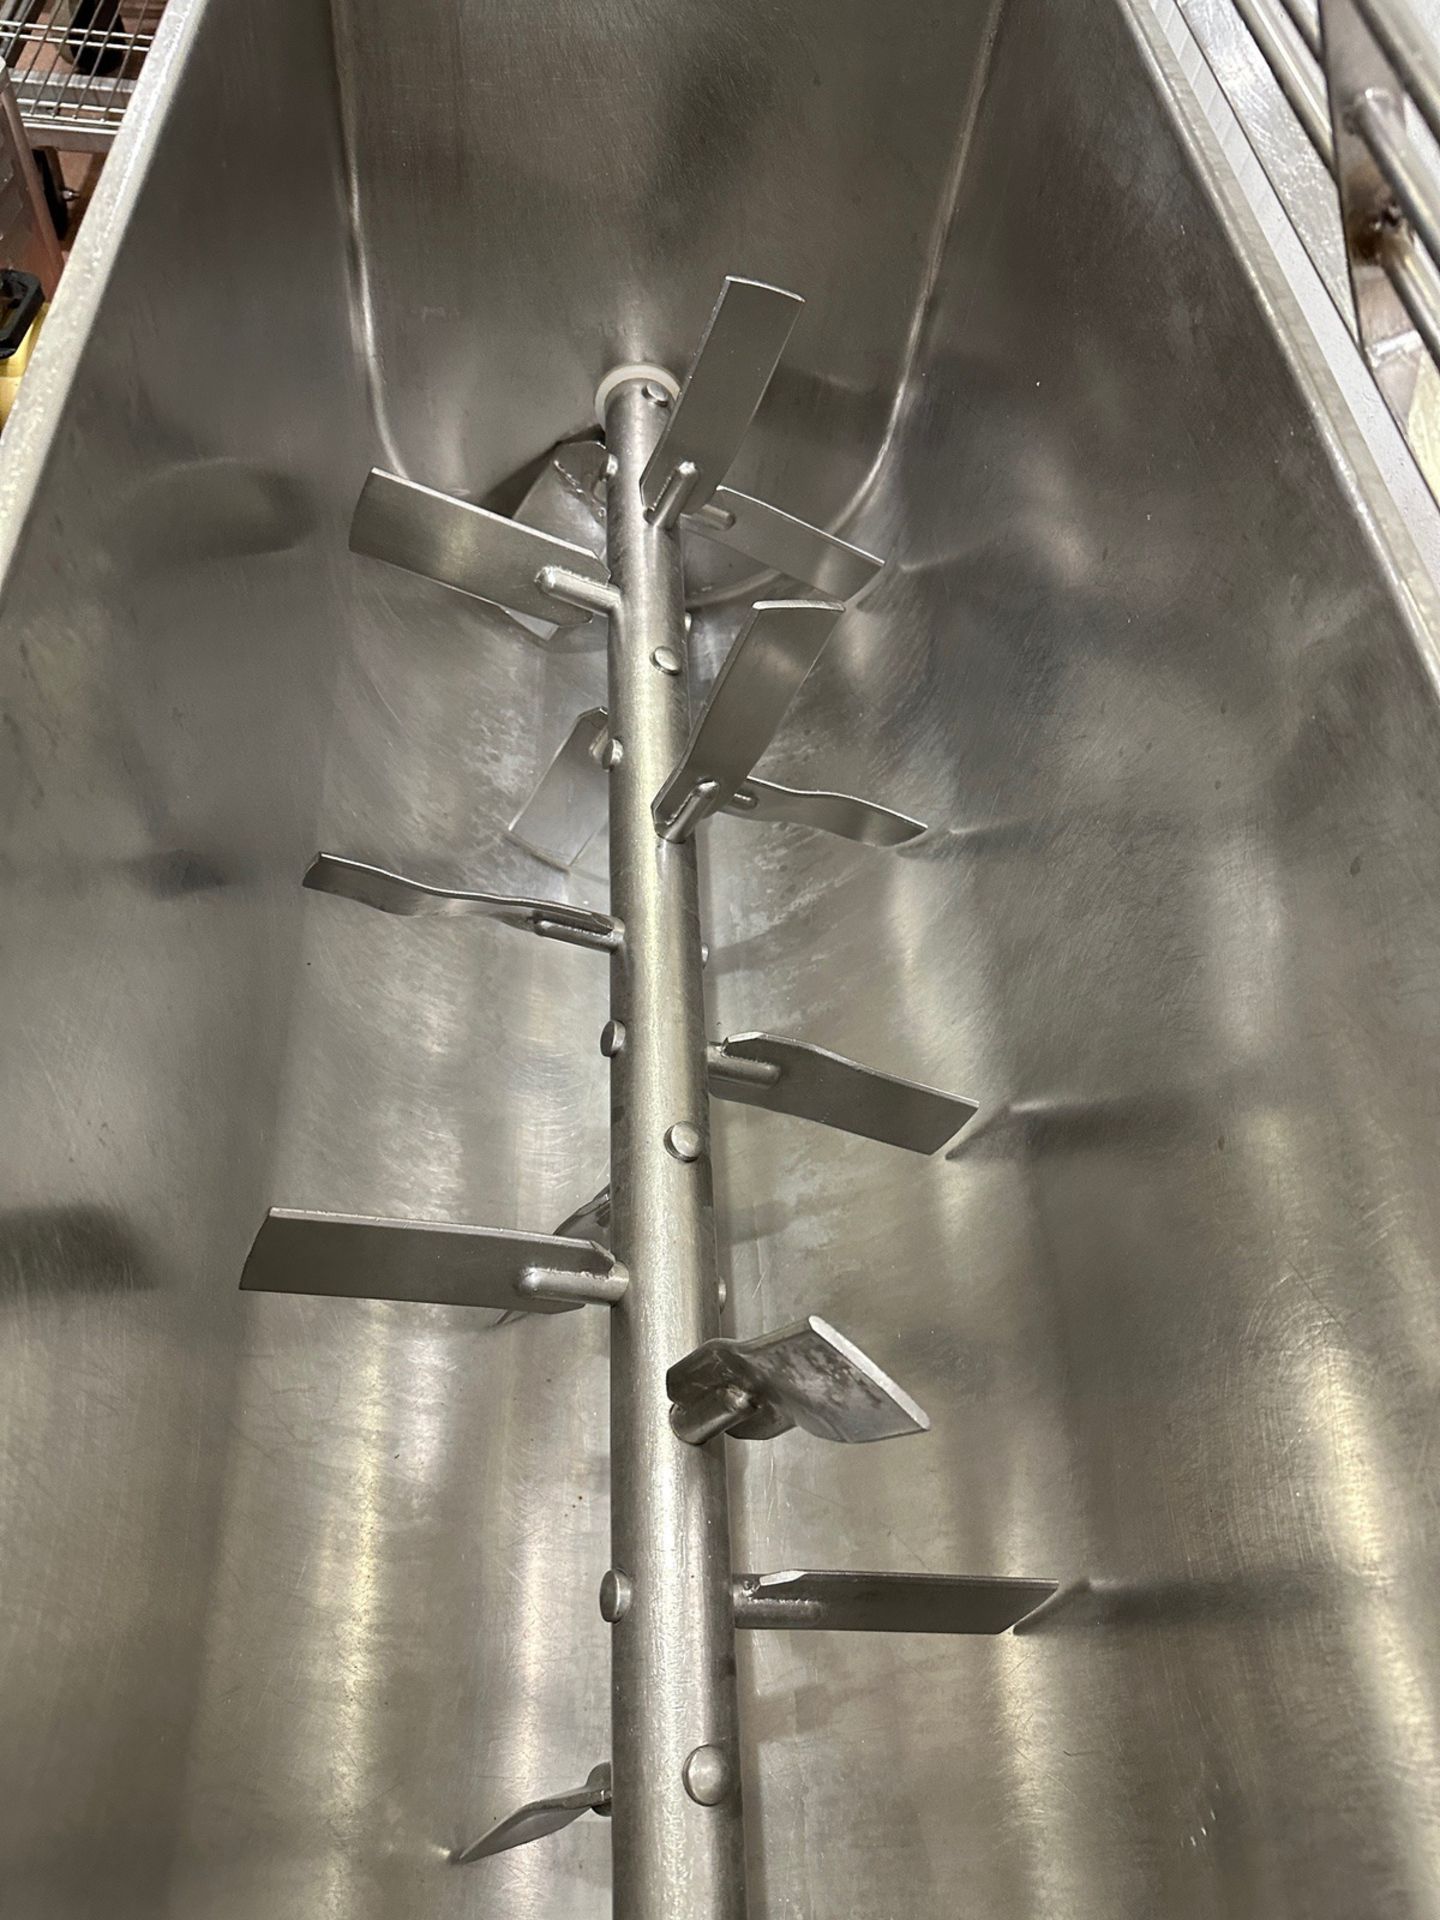 Stainless Steel Single Shaft Paddle Mixer, 42" x 16" Wide x 24" Deep - Subj to Bulk | Rig Fee $250 - Image 4 of 10